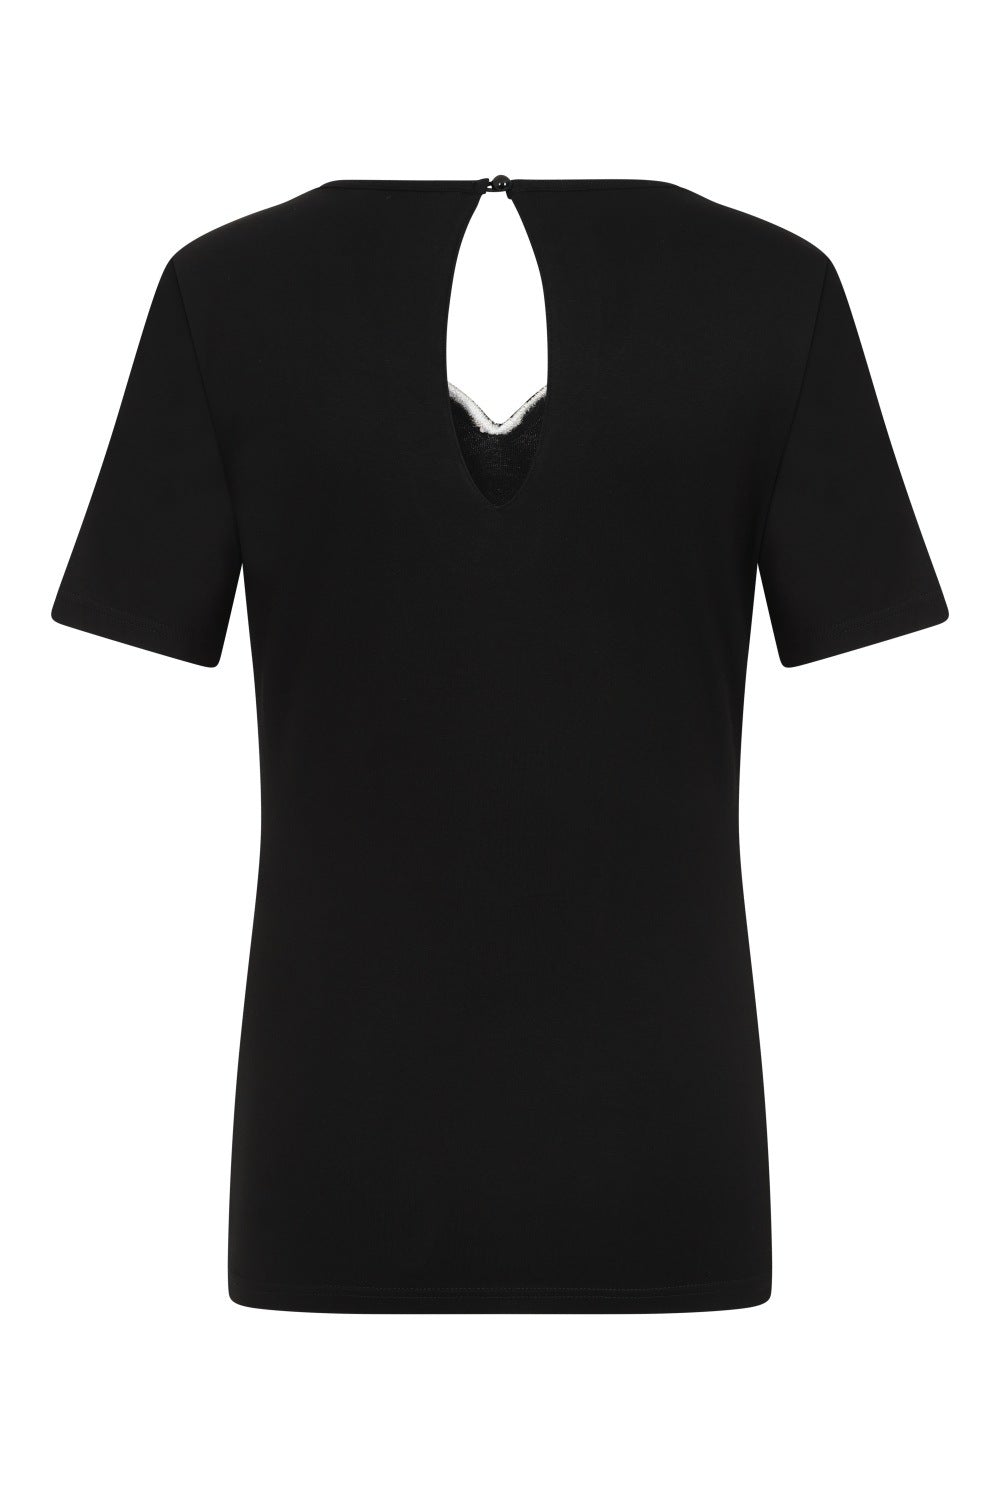 Plain black back of top with keyhole.